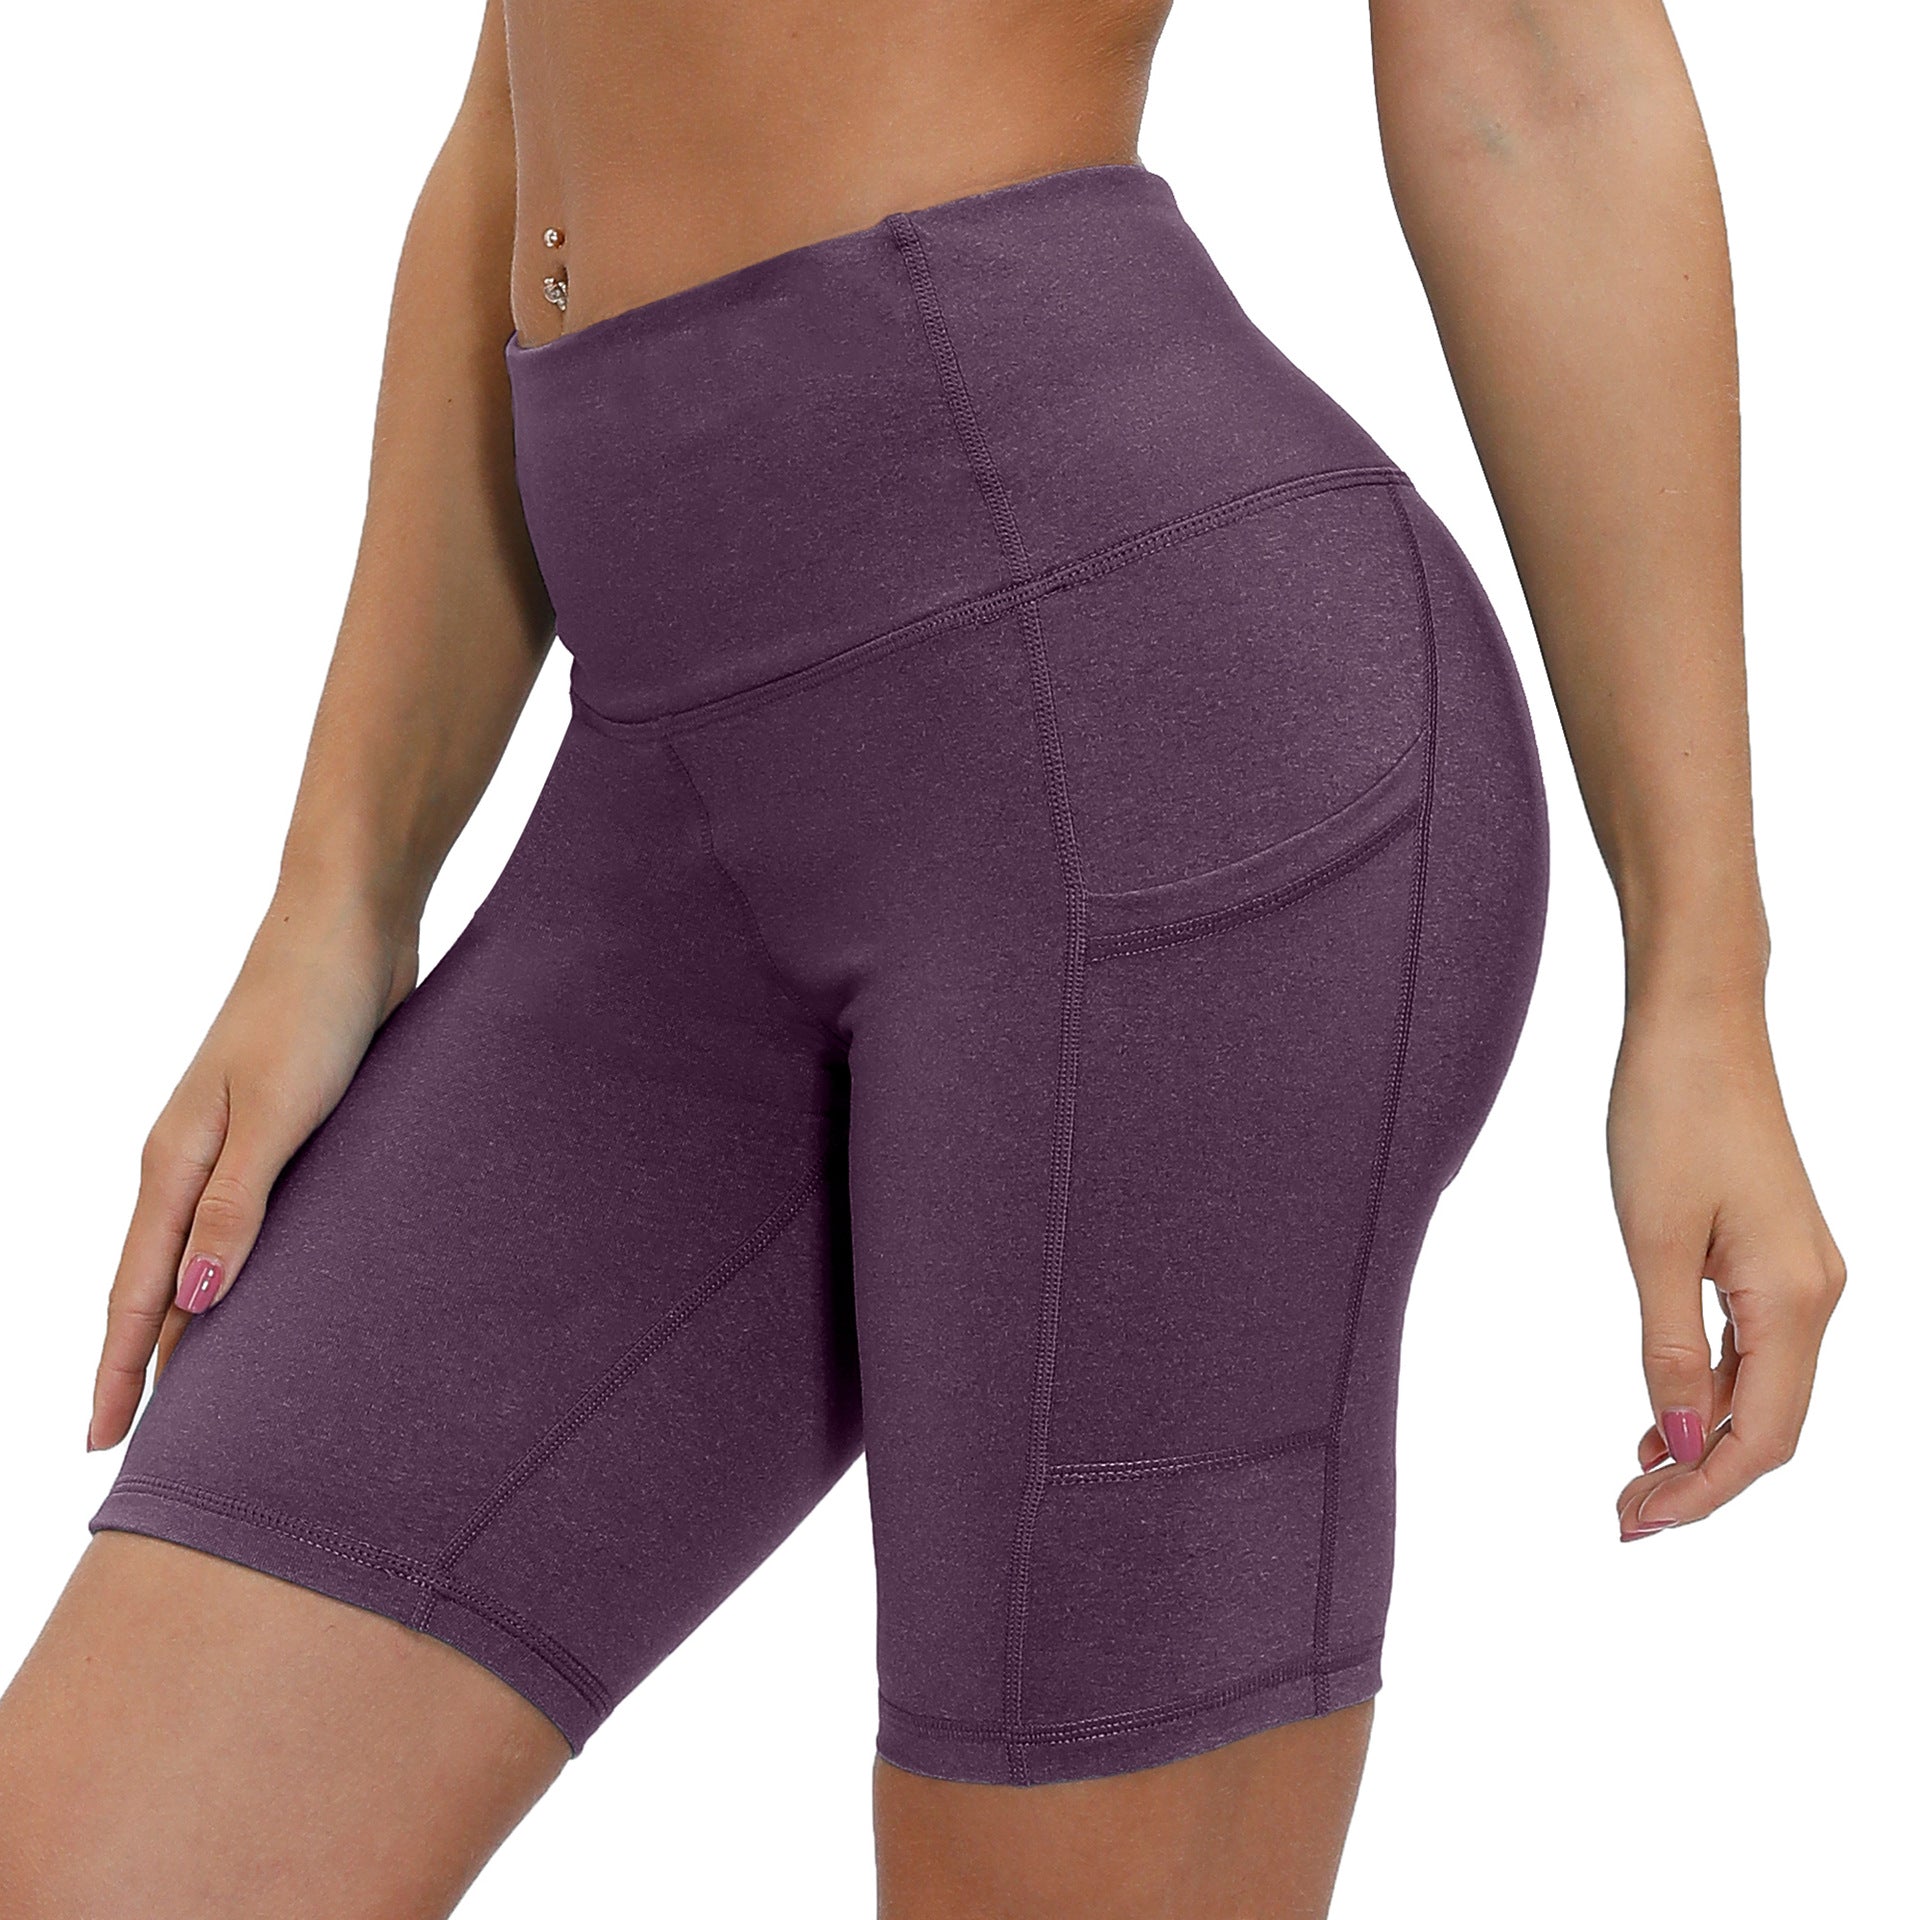 Five Minutes Pants Female Sports Running Shorts Tight Height Waist Yoga Pants Stretch Fitness Speed Dry